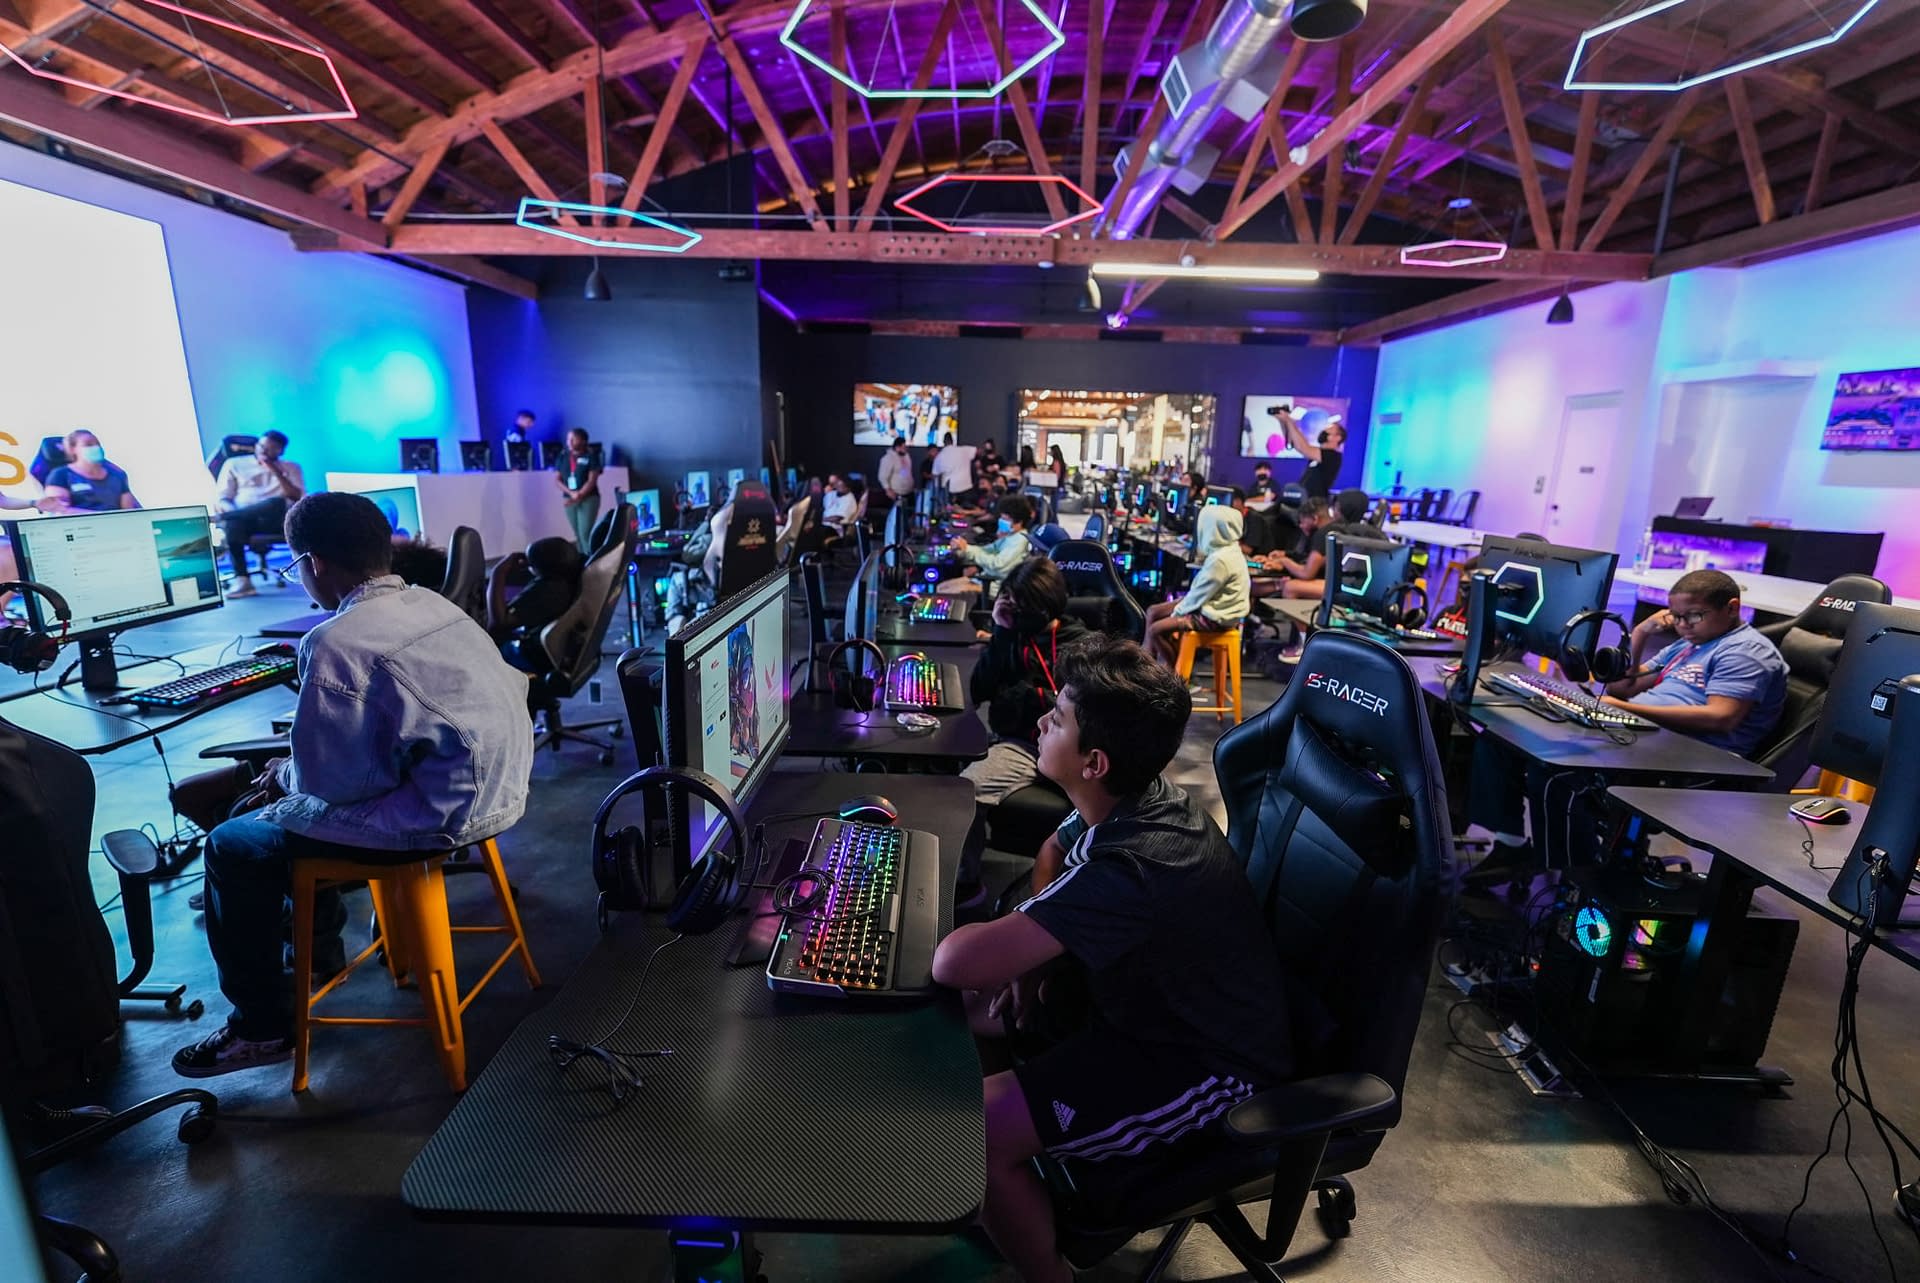 The Grand Opening of the SoLa Technology and Entrepreneurship Center  Powered by Riot Games